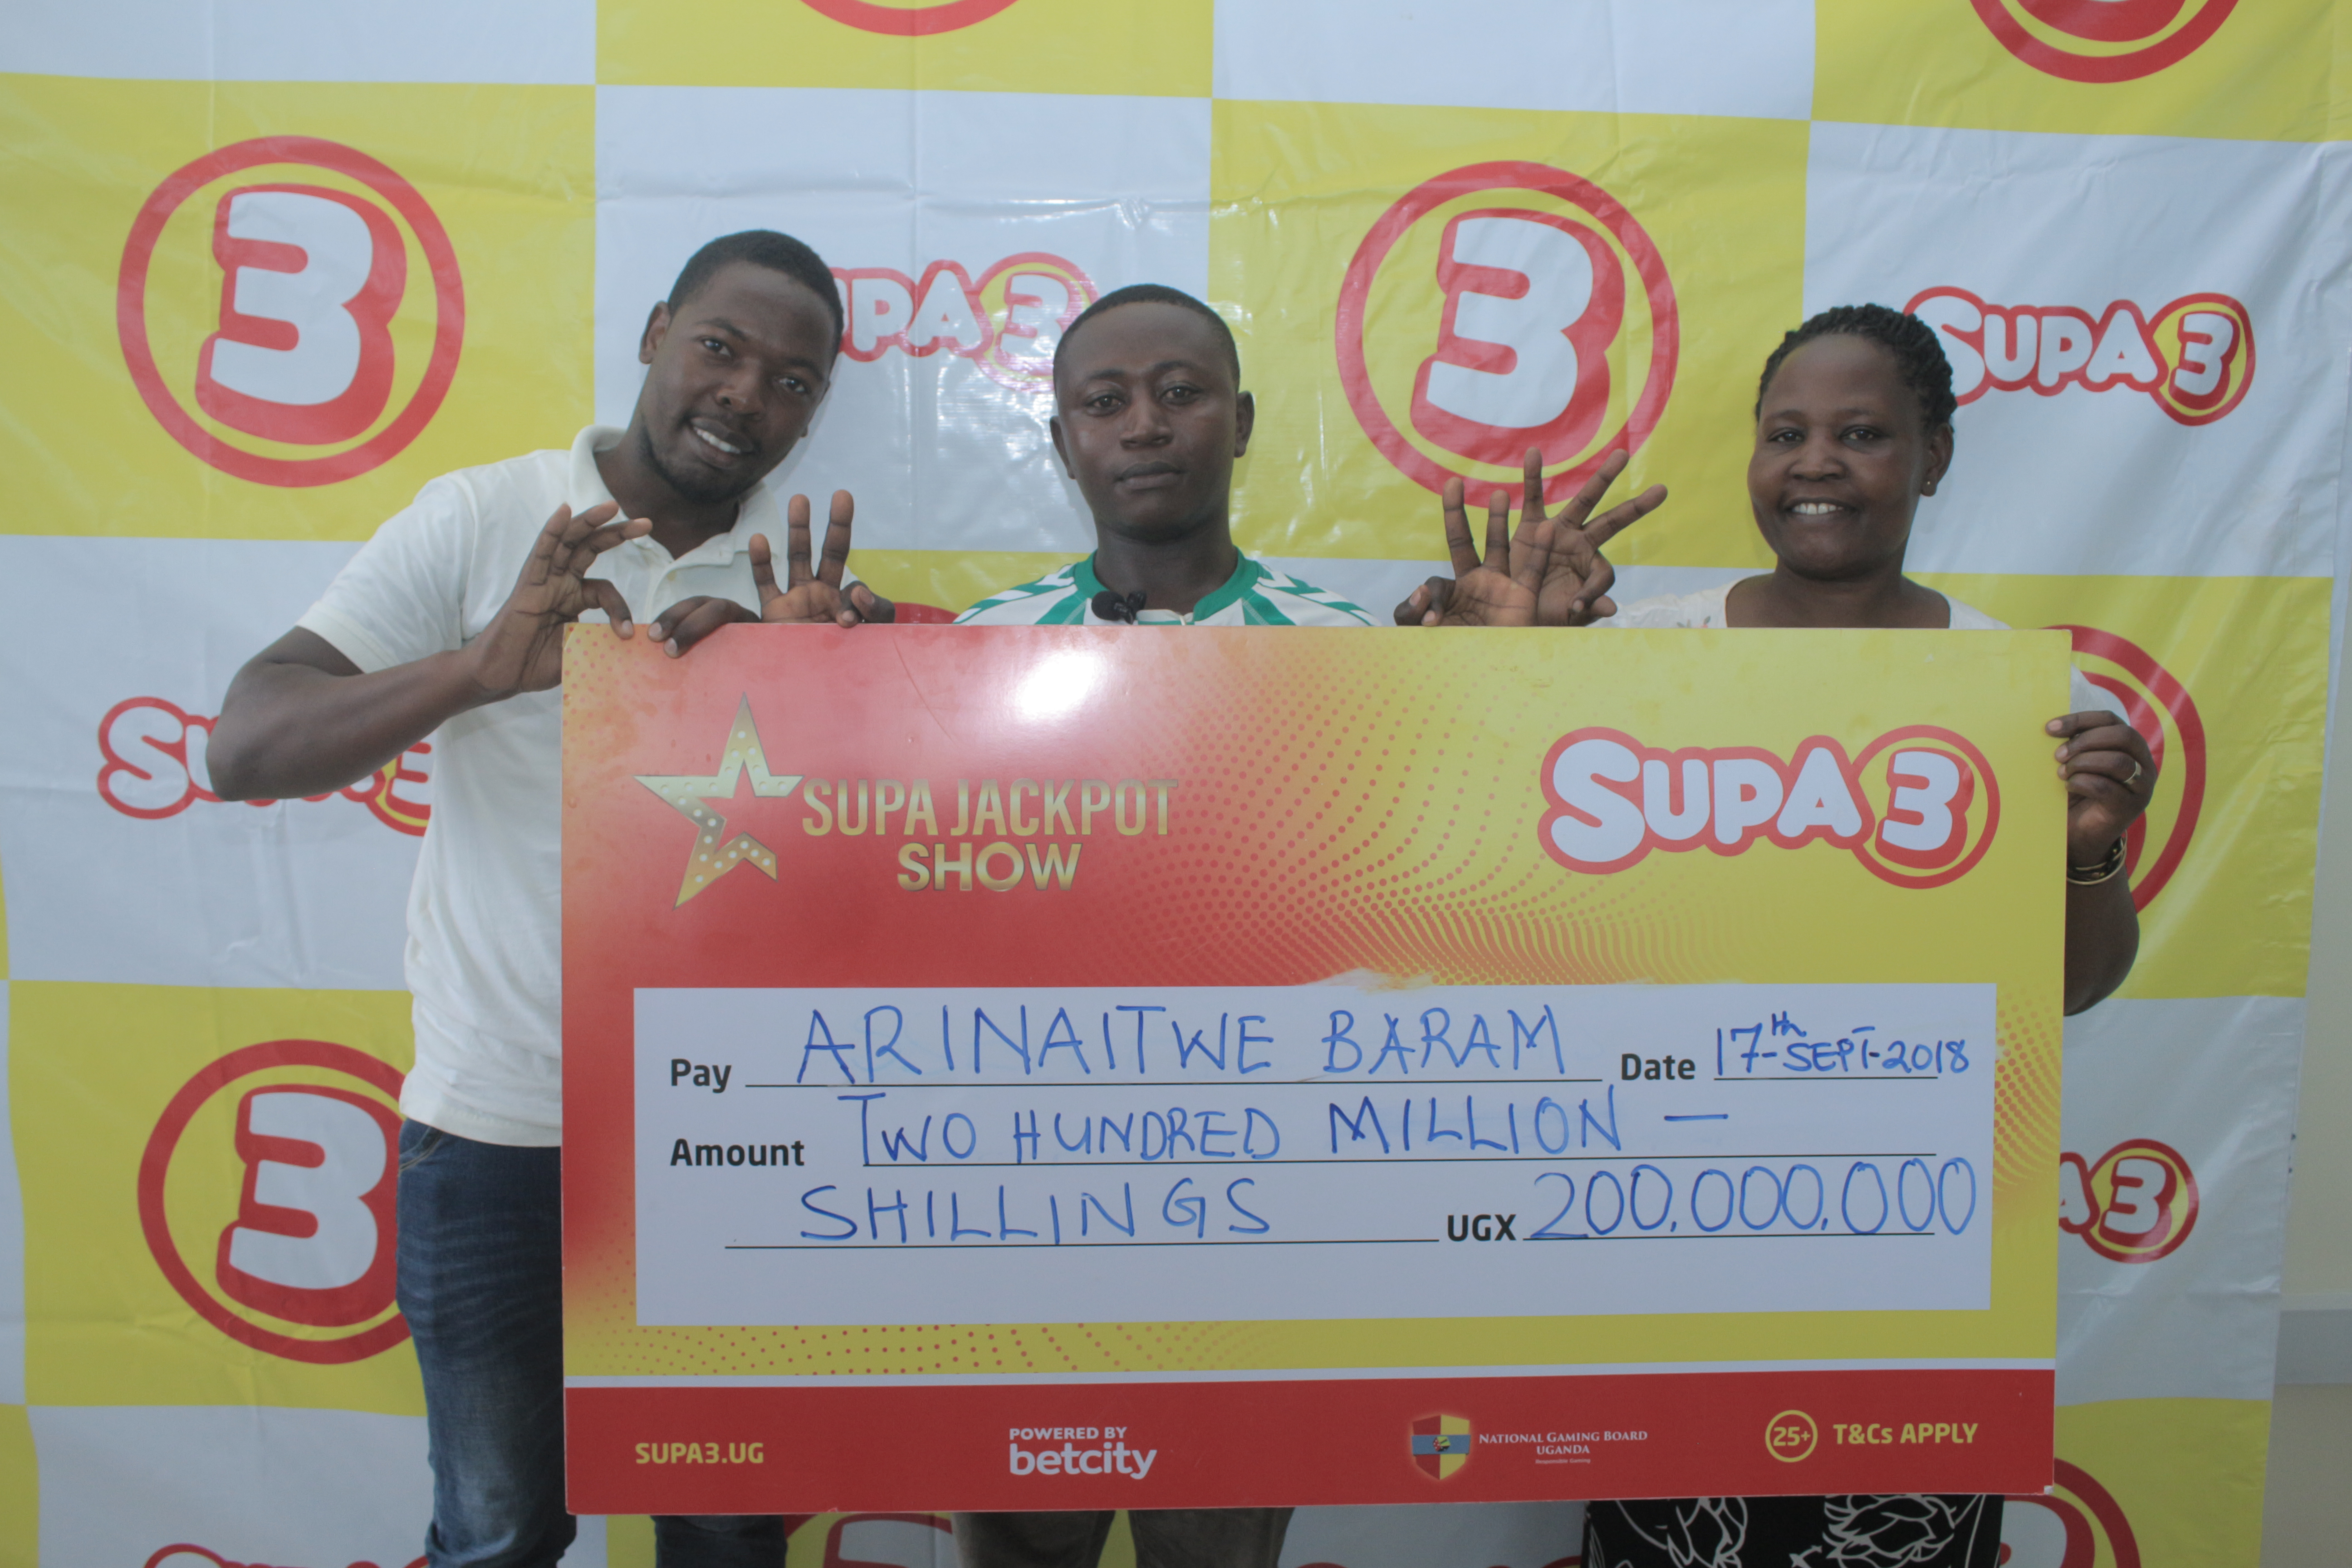 Supa3 gives out 200 million to second Supa Jackpot winner